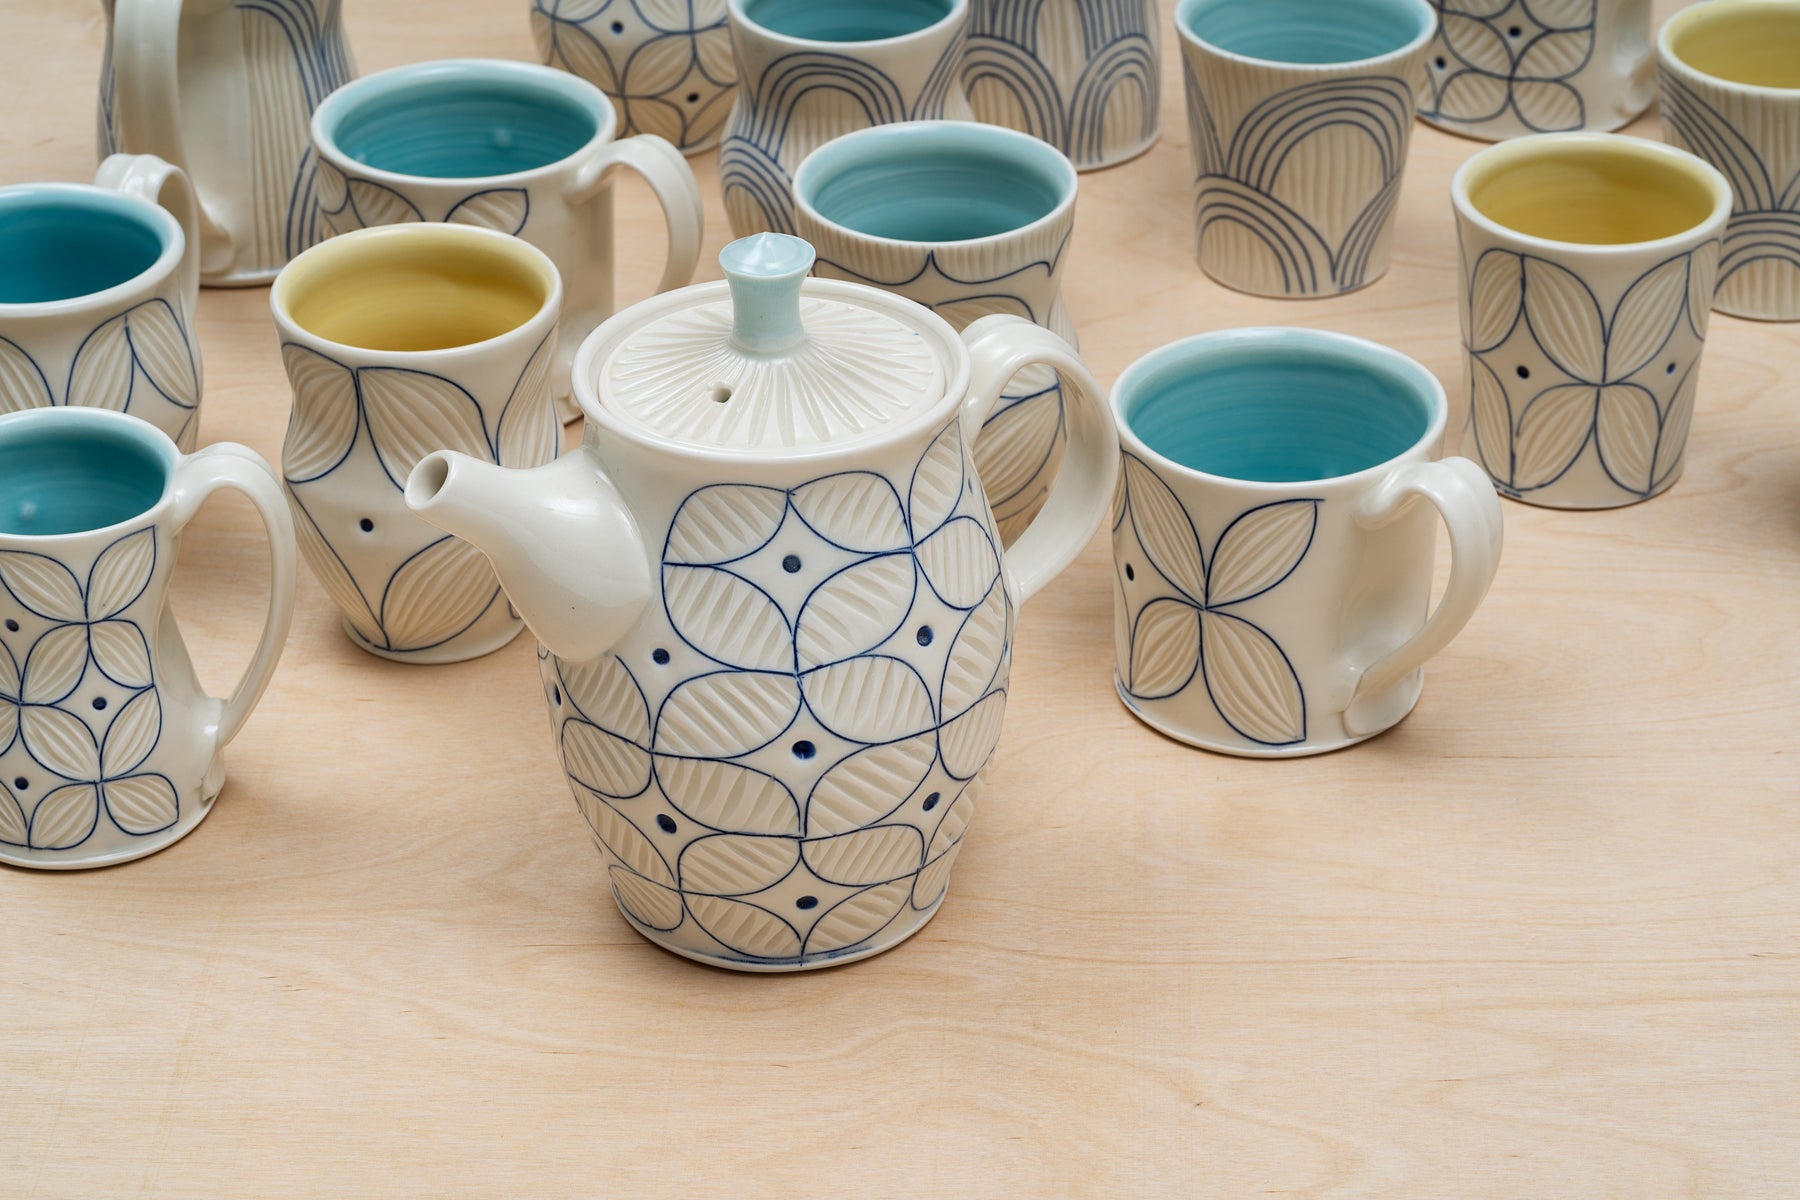 White and blue handmade porcelain cups and mugs by ceramic artist Julie Wiggins sit on a light wood table. Image by Loam